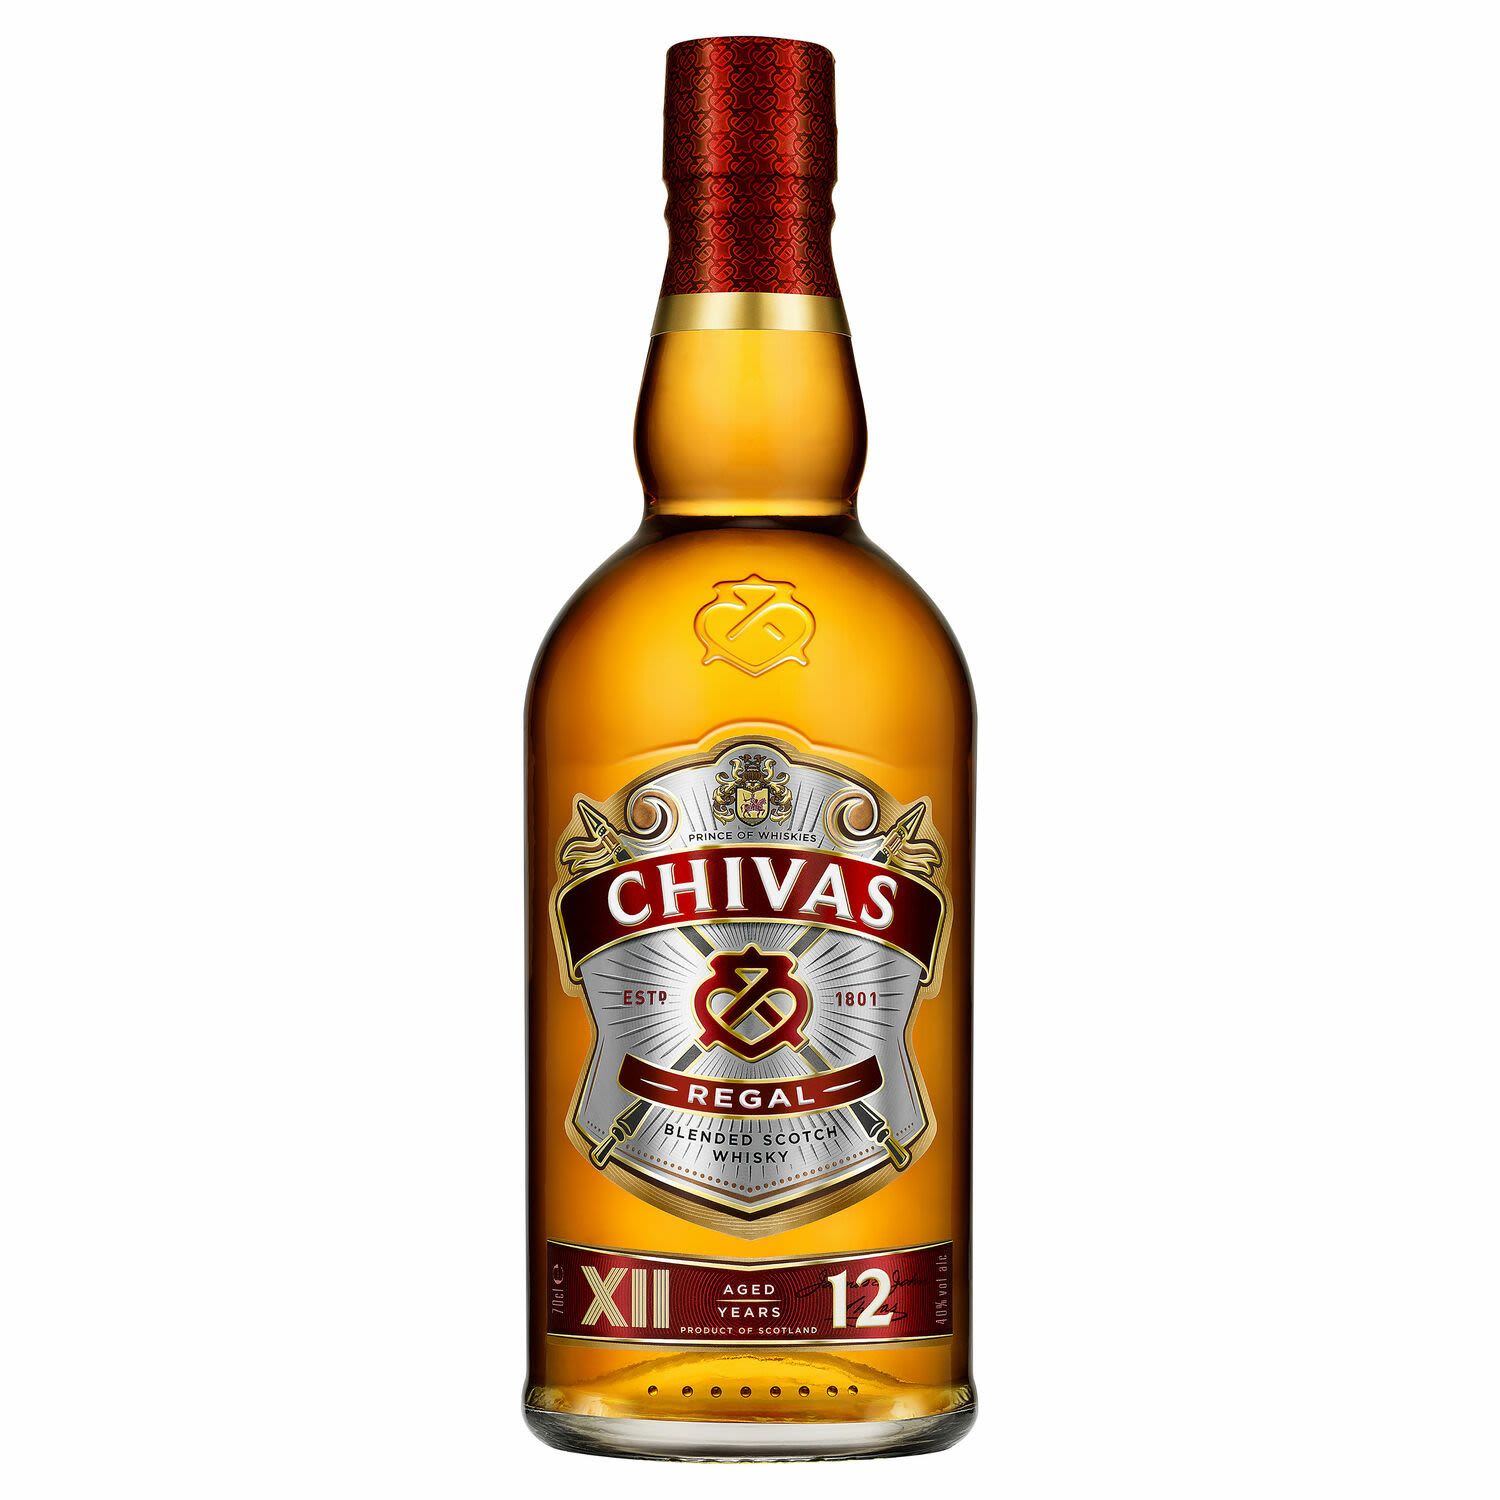 From the oldest operating distillery in the Scottish Highlands, Chivas Regal has been famous for its extraordinary selection of malt Whiskies. Matured for 12 years the result is a rich and generous Whisky with honey and hazelnut notes and a long creamy finish. Chivas Regal is the perfect gift for all occasions.<br /> <br />Alcohol Volume: 40.00%<br /><br />Pack Format: Bottle<br /><br />Standard Drinks: 22<br /><br />Pack Type: Bottle<br /><br />Country of Origin: Scotland<br />